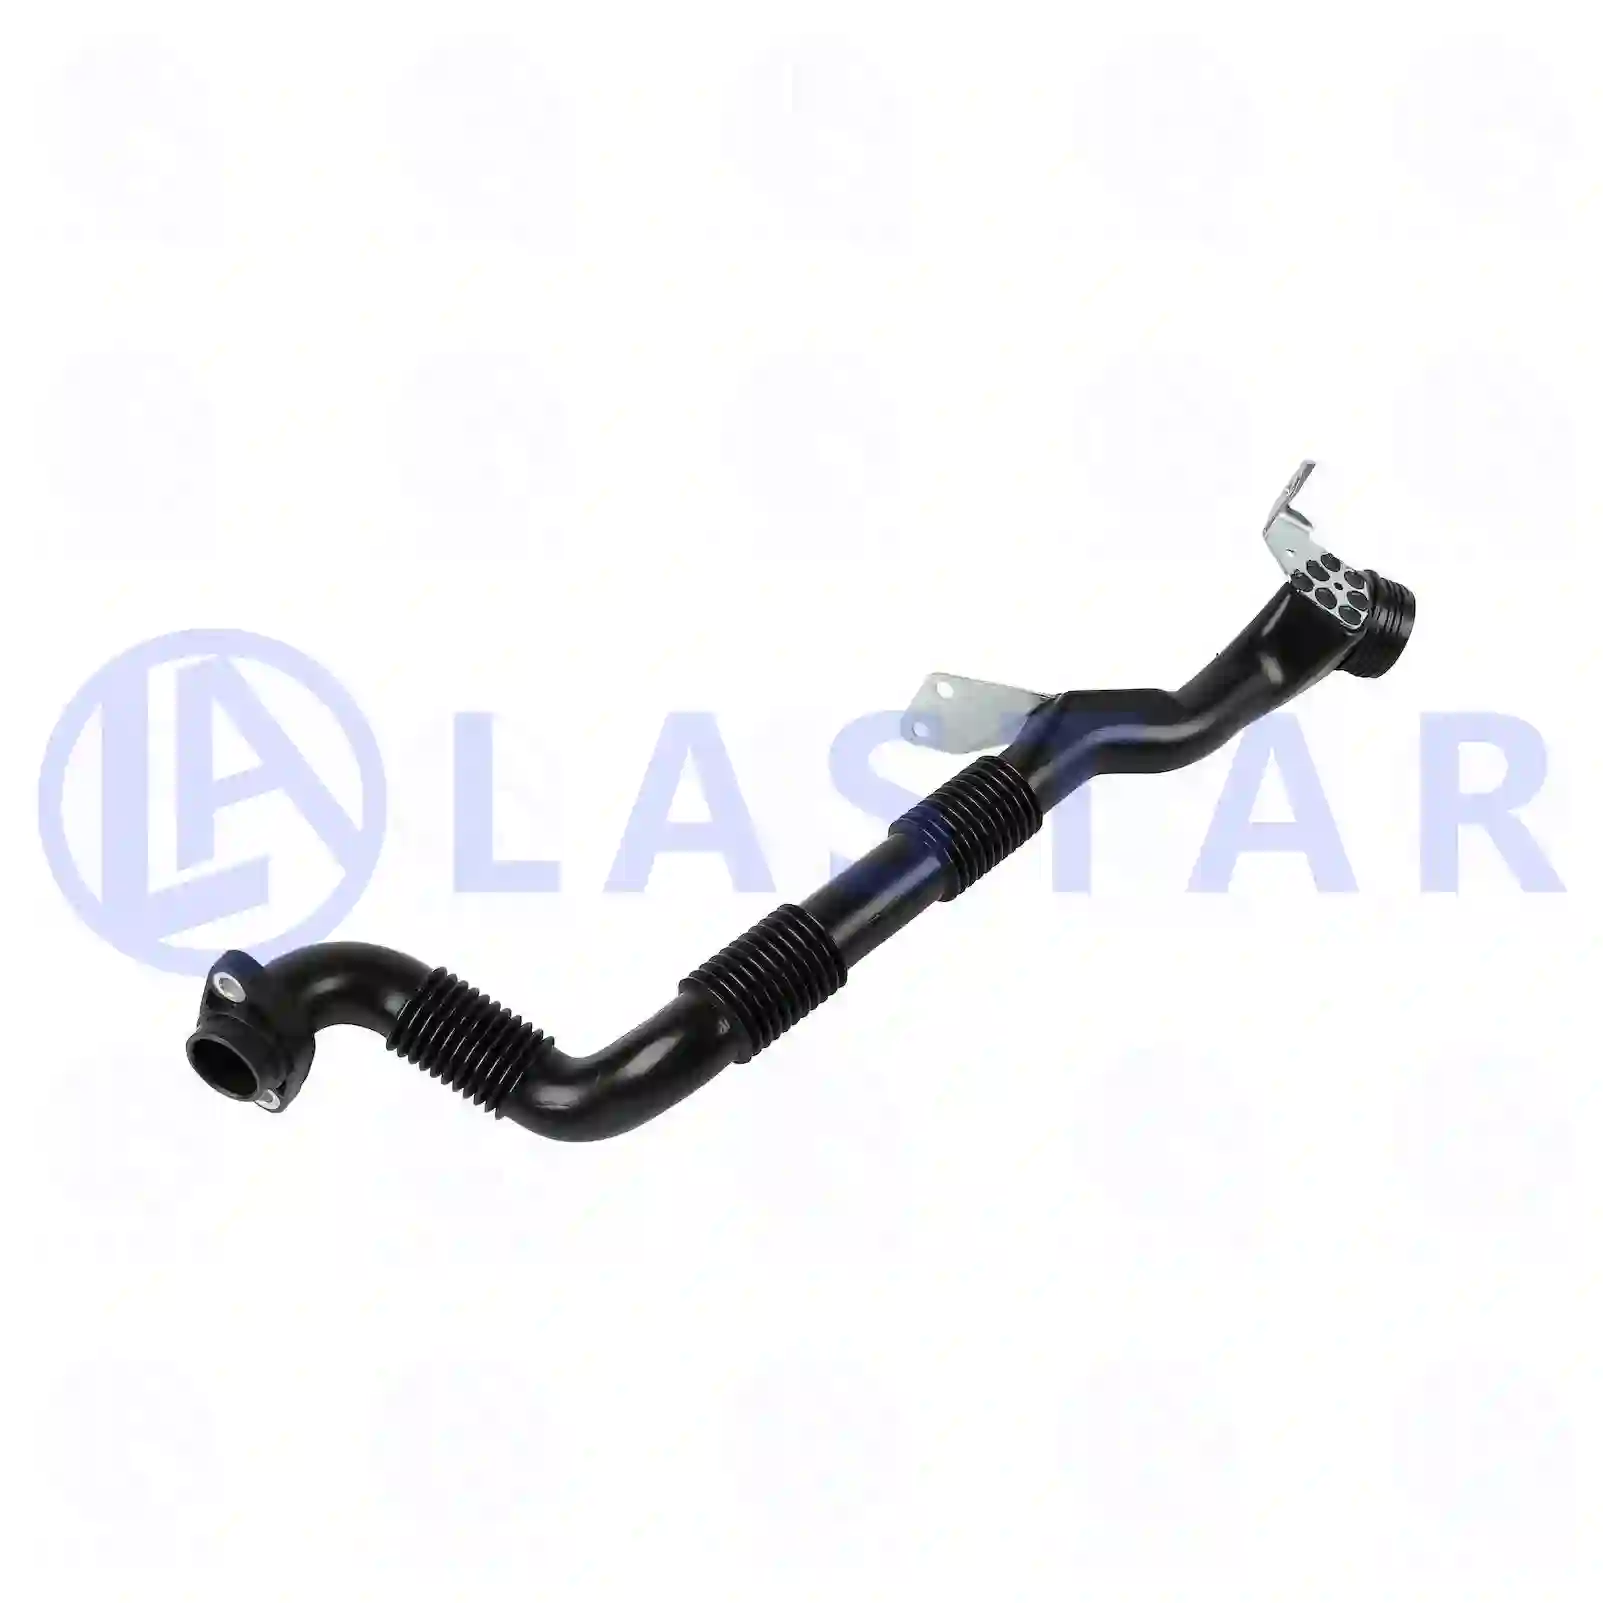 Oil filler connector, 77700761, 1676362, 1676594 ||  77700761 Lastar Spare Part | Truck Spare Parts, Auotomotive Spare Parts Oil filler connector, 77700761, 1676362, 1676594 ||  77700761 Lastar Spare Part | Truck Spare Parts, Auotomotive Spare Parts